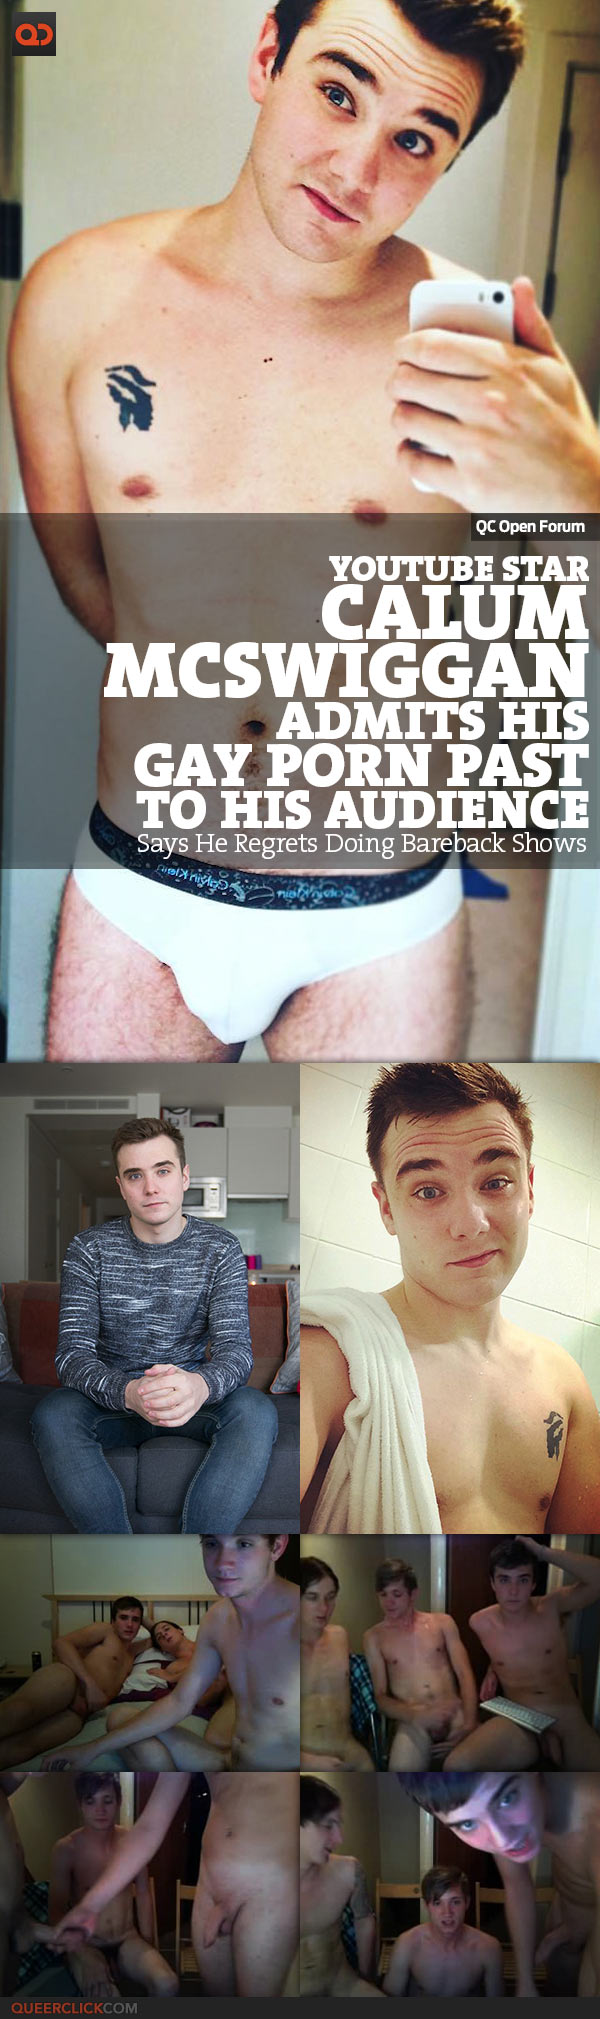 QC Open Forum YouTube Star Calum McSwiggan Admits His Gay Porn Past To His Audience, Says He Regrets Doing Bareback Shows